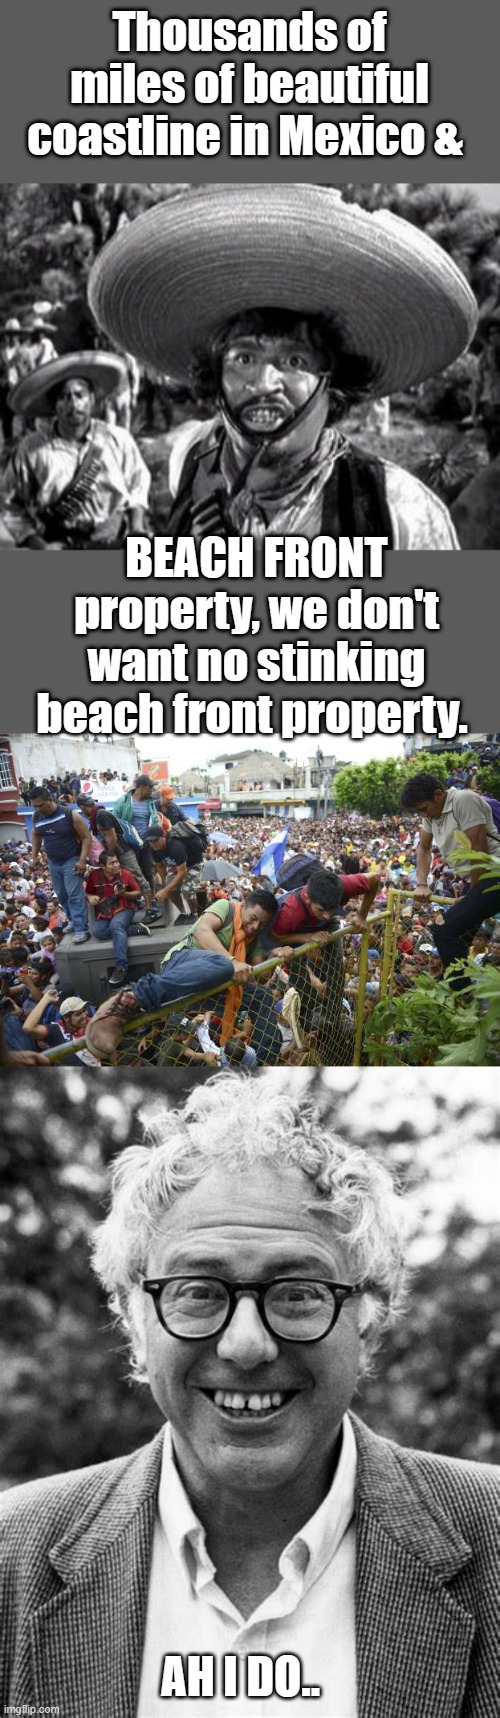 BE$RNIE has lived off your dime his whole life.. | Thousands of miles of beautiful coastline in Mexico &; BEACH FRONT property, we don't want no stinking beach front property. AH I DO.. | image tagged in democrats,socialists,thieves | made w/ Imgflip meme maker